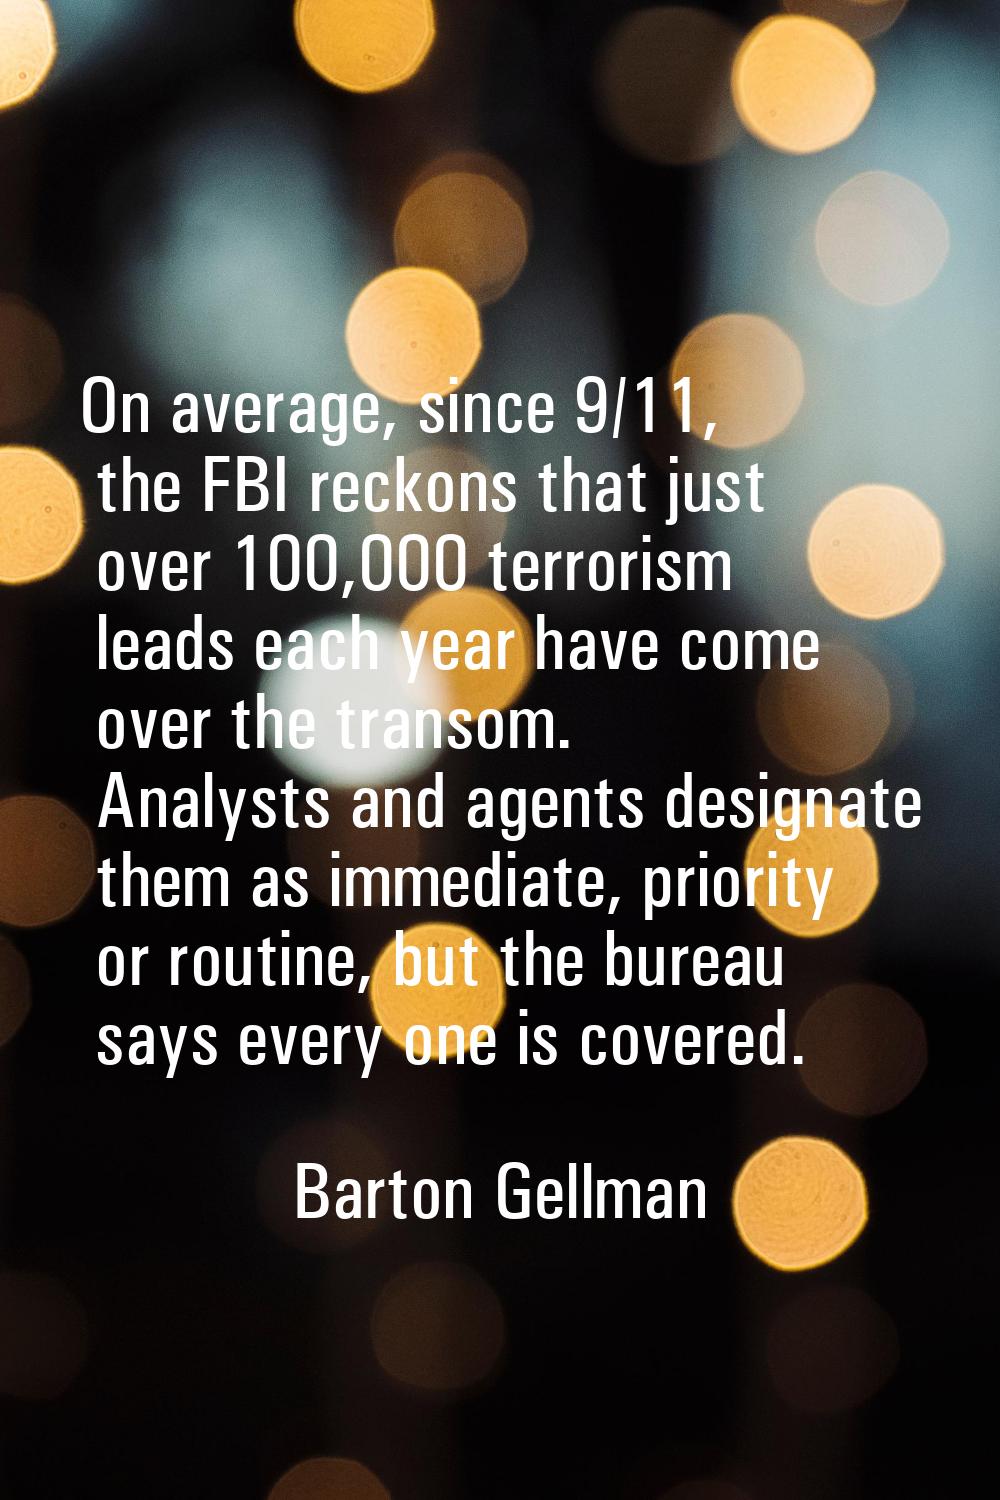 On average, since 9/11, the FBI reckons that just over 100,000 terrorism leads each year have come 